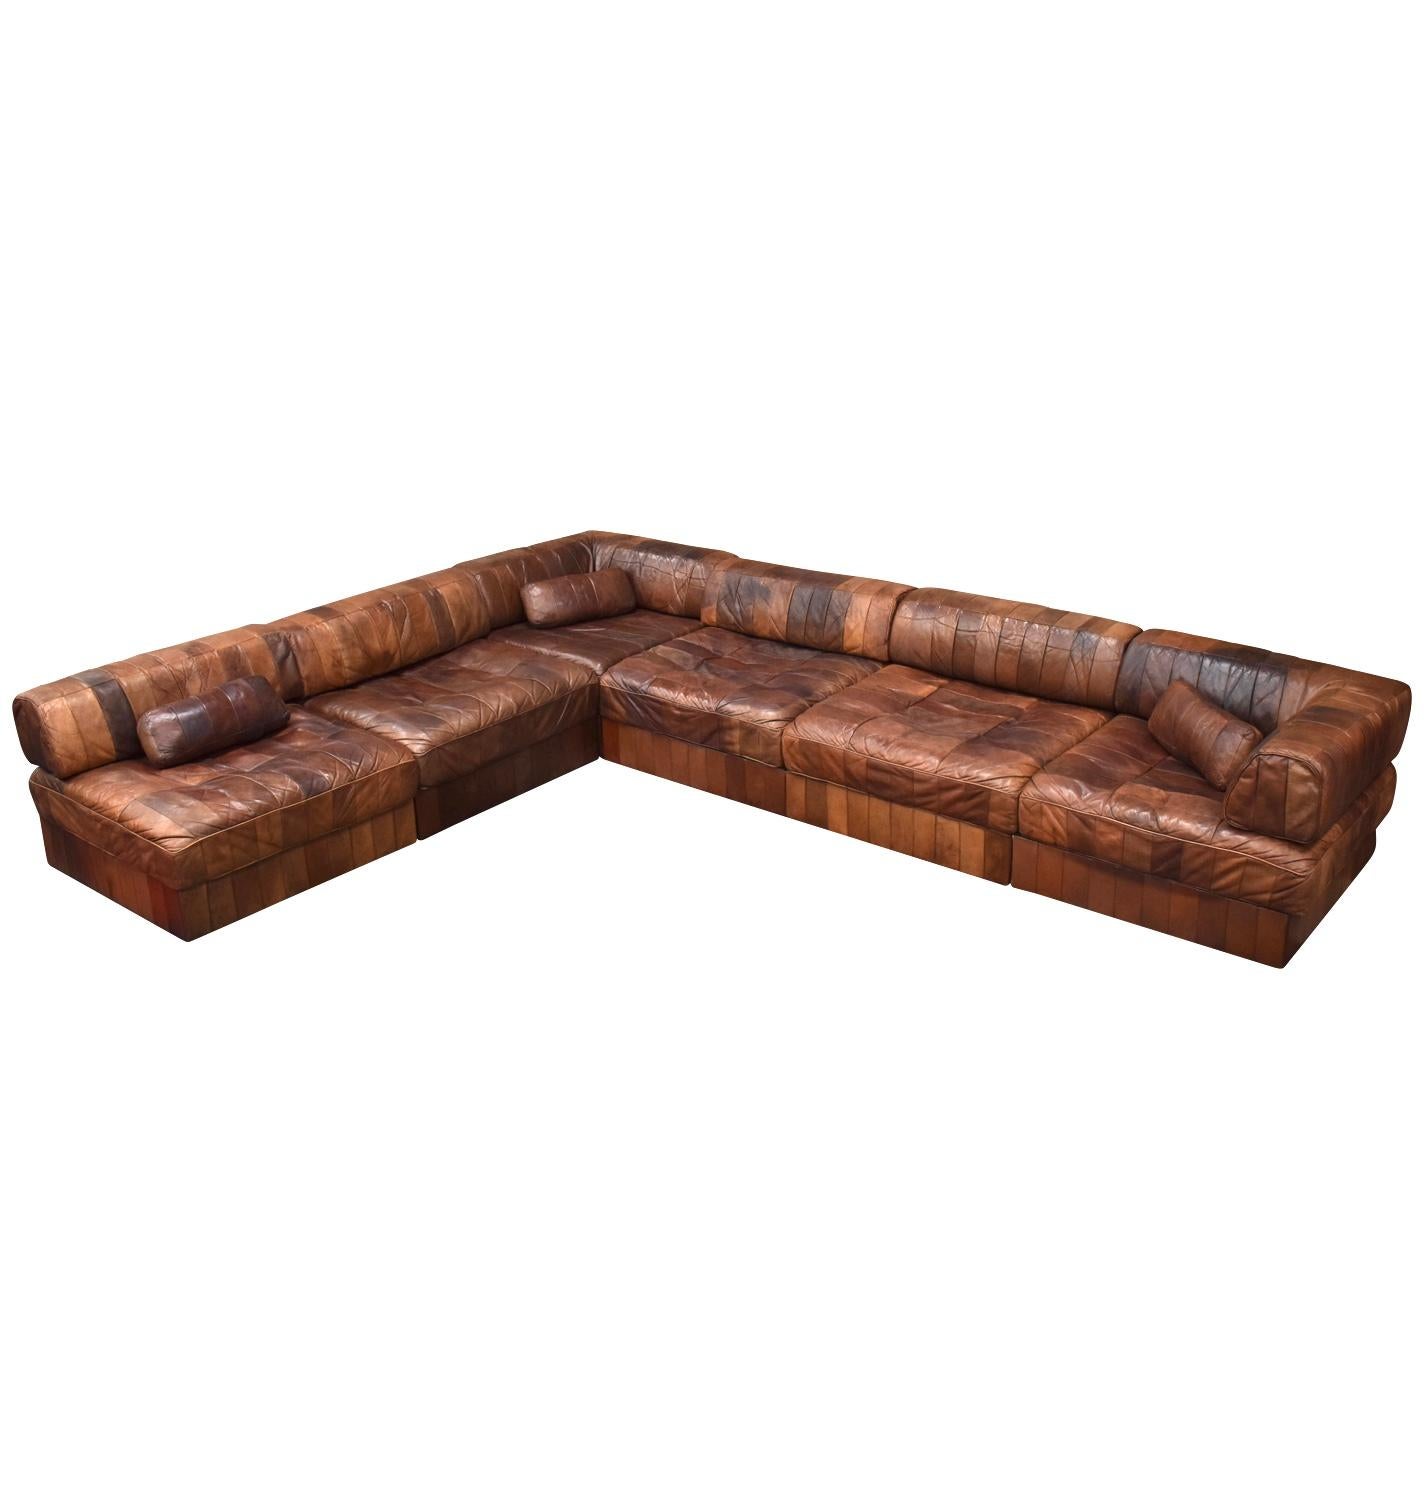 Mid-Century Modern De Sede DS88 Sectional Patchwork Sofa in Tan Leather, Switzerland